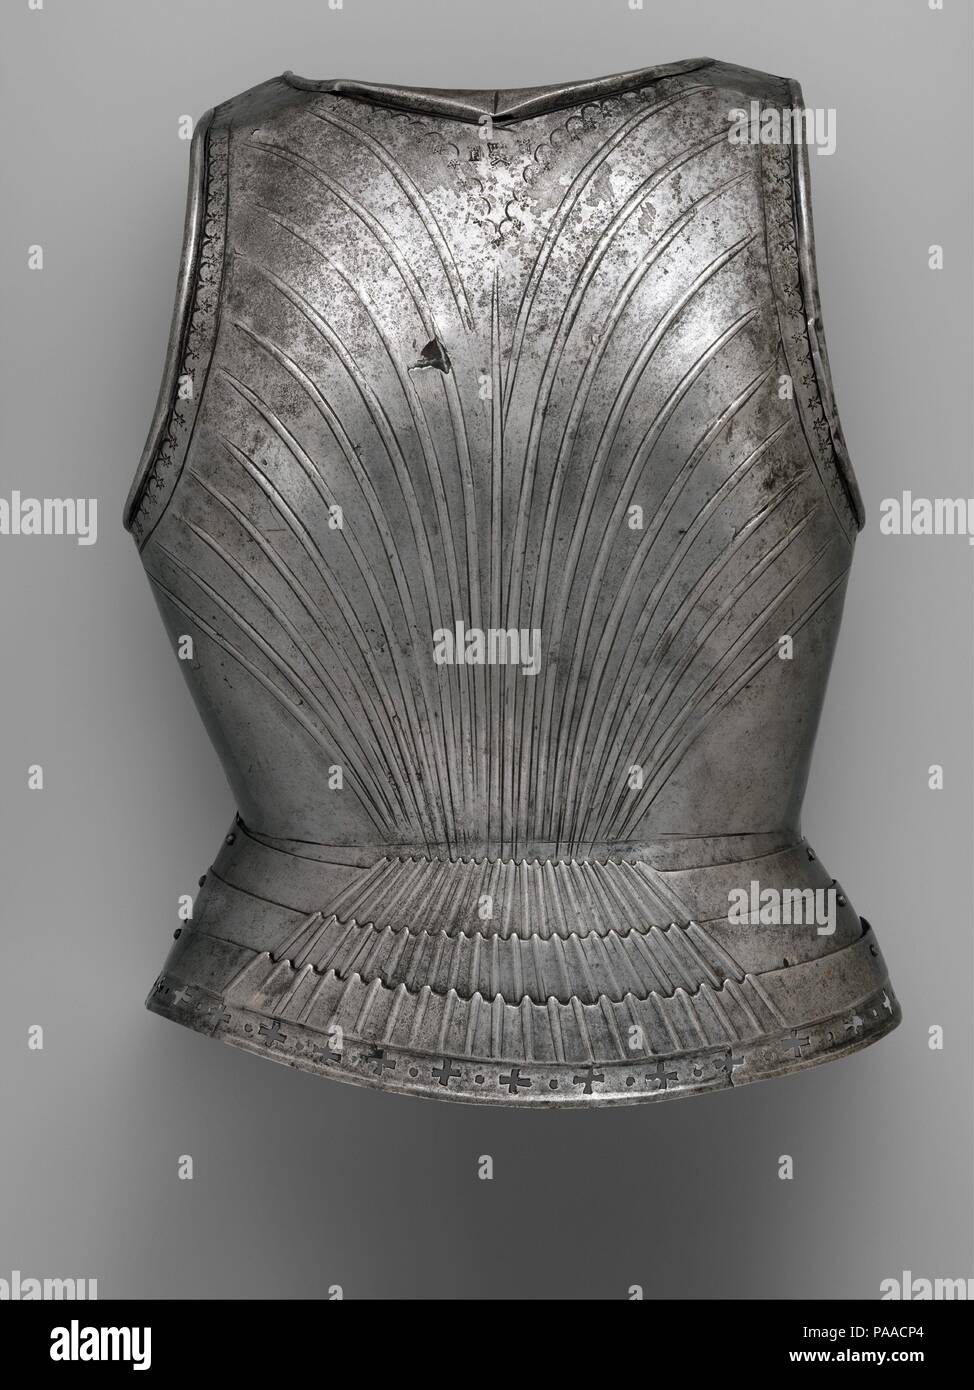 Backplate. Armorer: Probably by Francesco Negroli (Italian, Milan, died before December 1519). Culture: Italian, Milan. Dimensions: H. 19 3/8 in. (49.3 cm); W. 15 1/4 in. (39 cm); D. 6 3/4 in. (17.3 cm); Wt. 5 lb. 6 oz. (2461 g). Date: ca. 1505-10.  Judging by the maker's marks stamped on it, this backplate appears to be the only surviving identifiable work by Francesco Negroli, a member of a leading family of Milanese armorers, which, in the next generation, became internationally renowned for their sculpturally embossed armors <i>all'antica</i> (in the antique style). The backplate is in a s Stock Photo